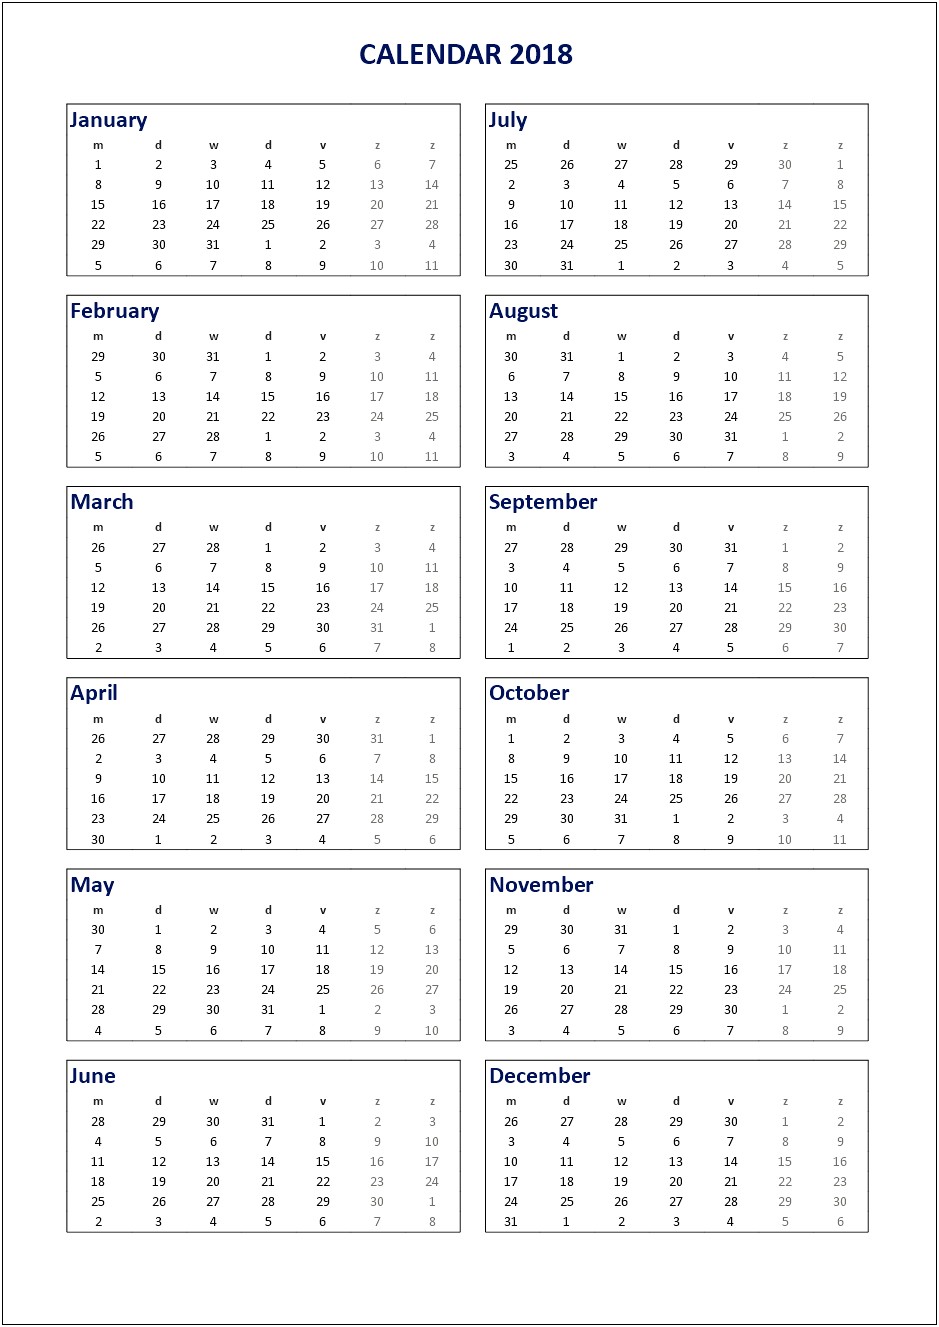 Calendar Listed Out In Word Template